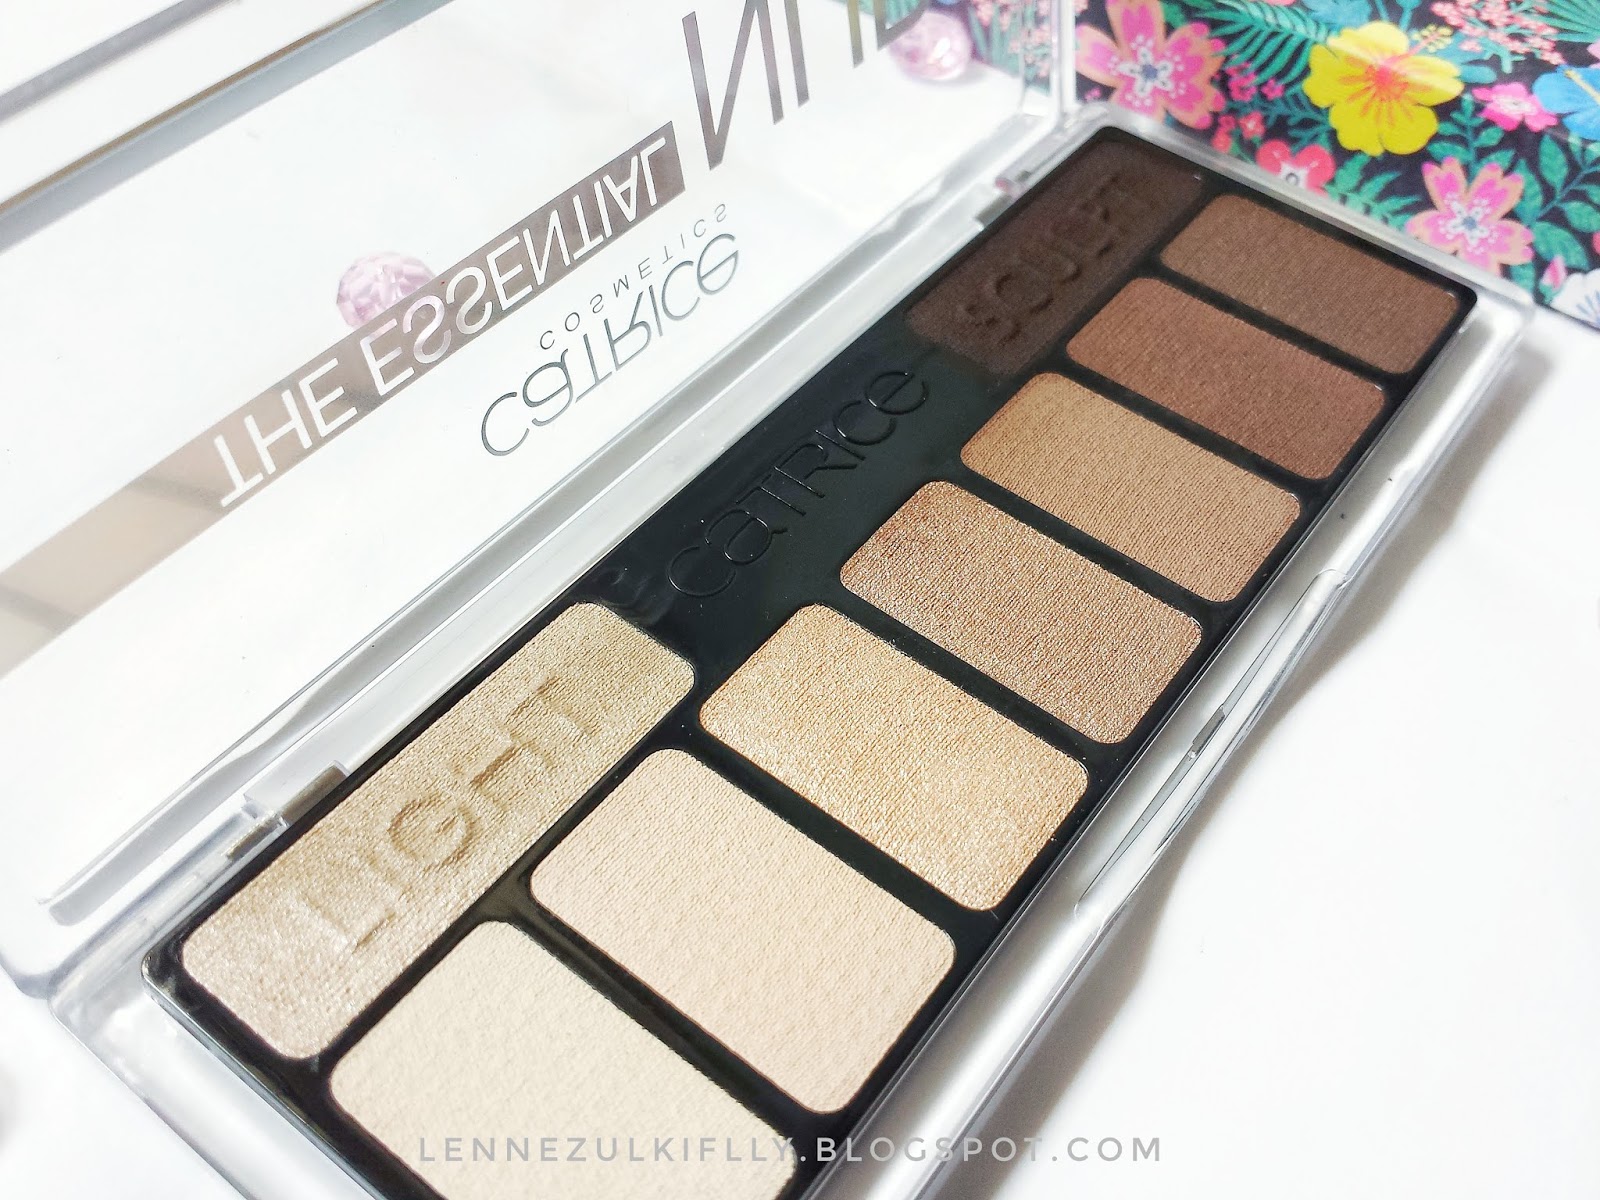 Catrice The Essential Nude Eyeshadow Palette | LENNE ZULKIFLLY